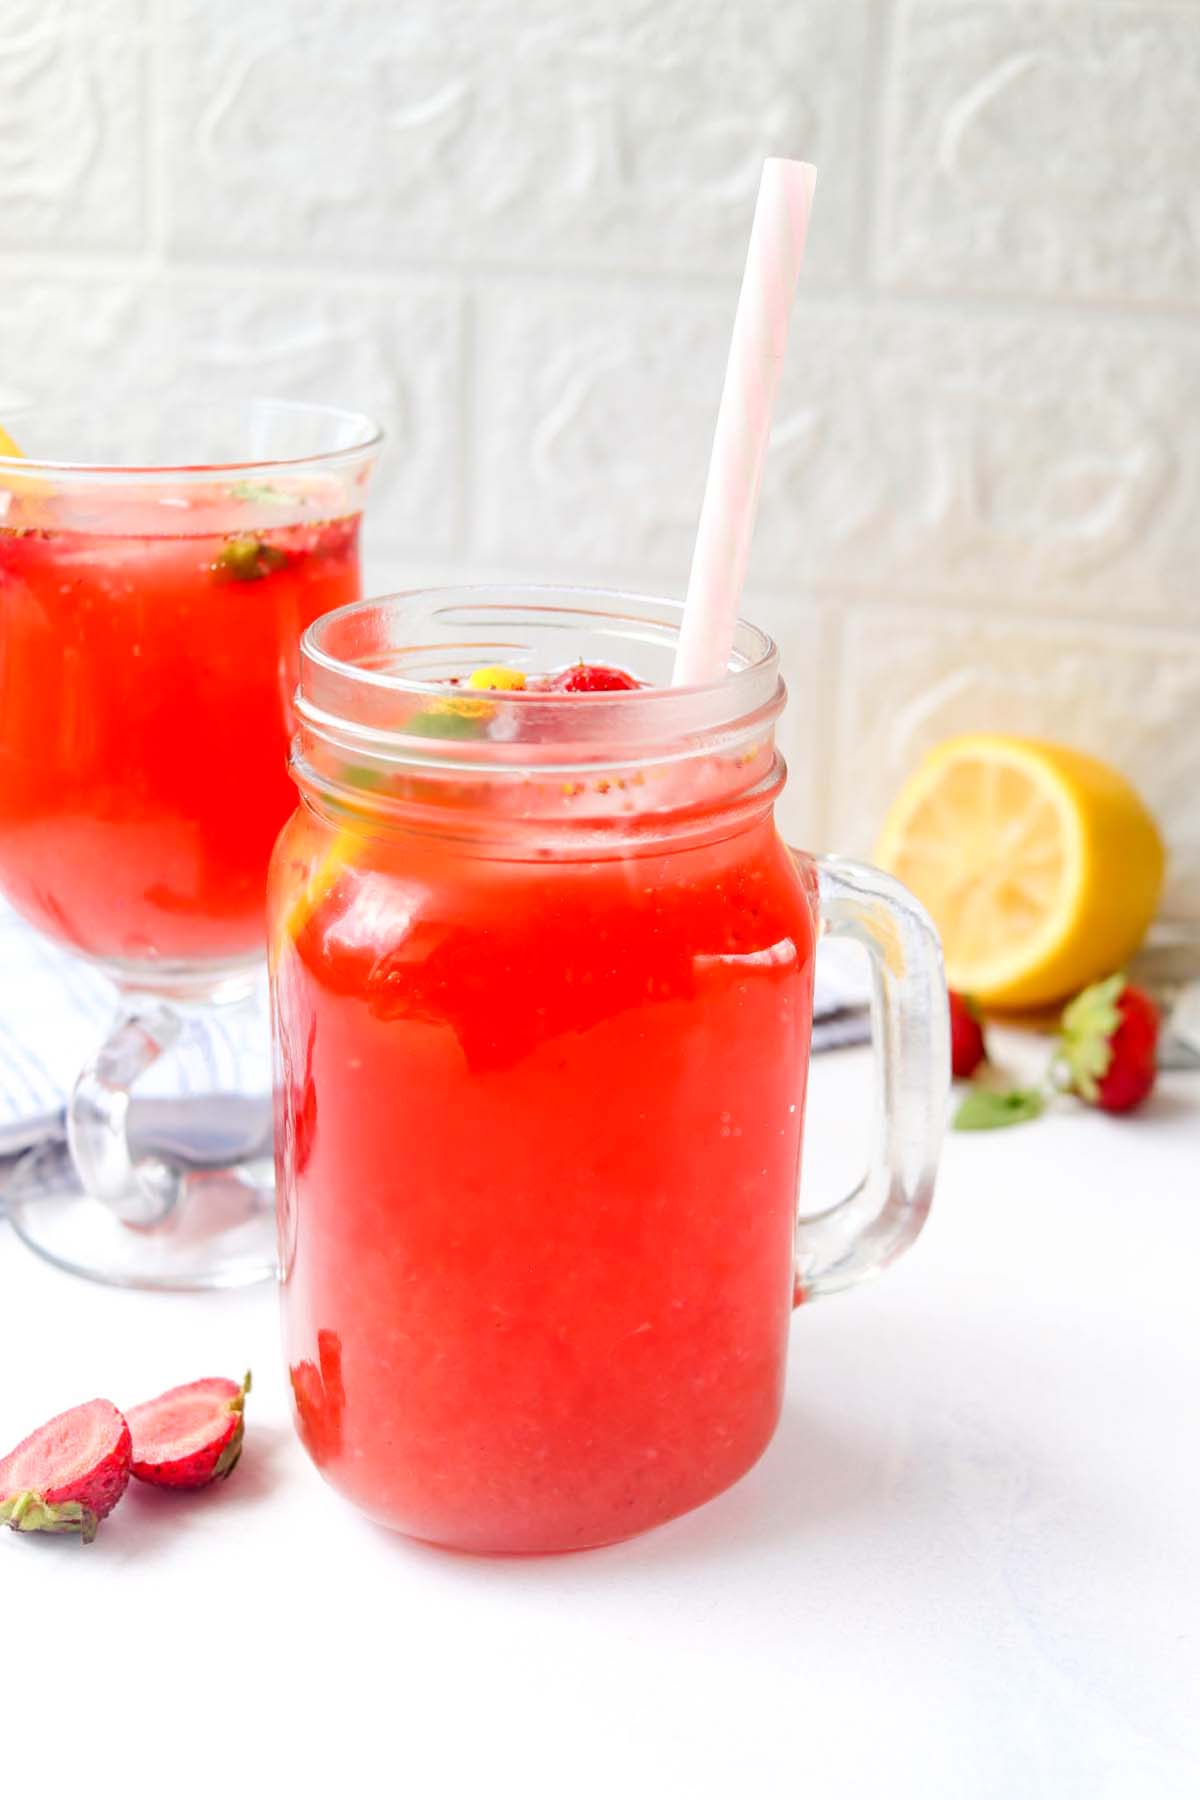 Strawberry lemonade in a glass with a straw.